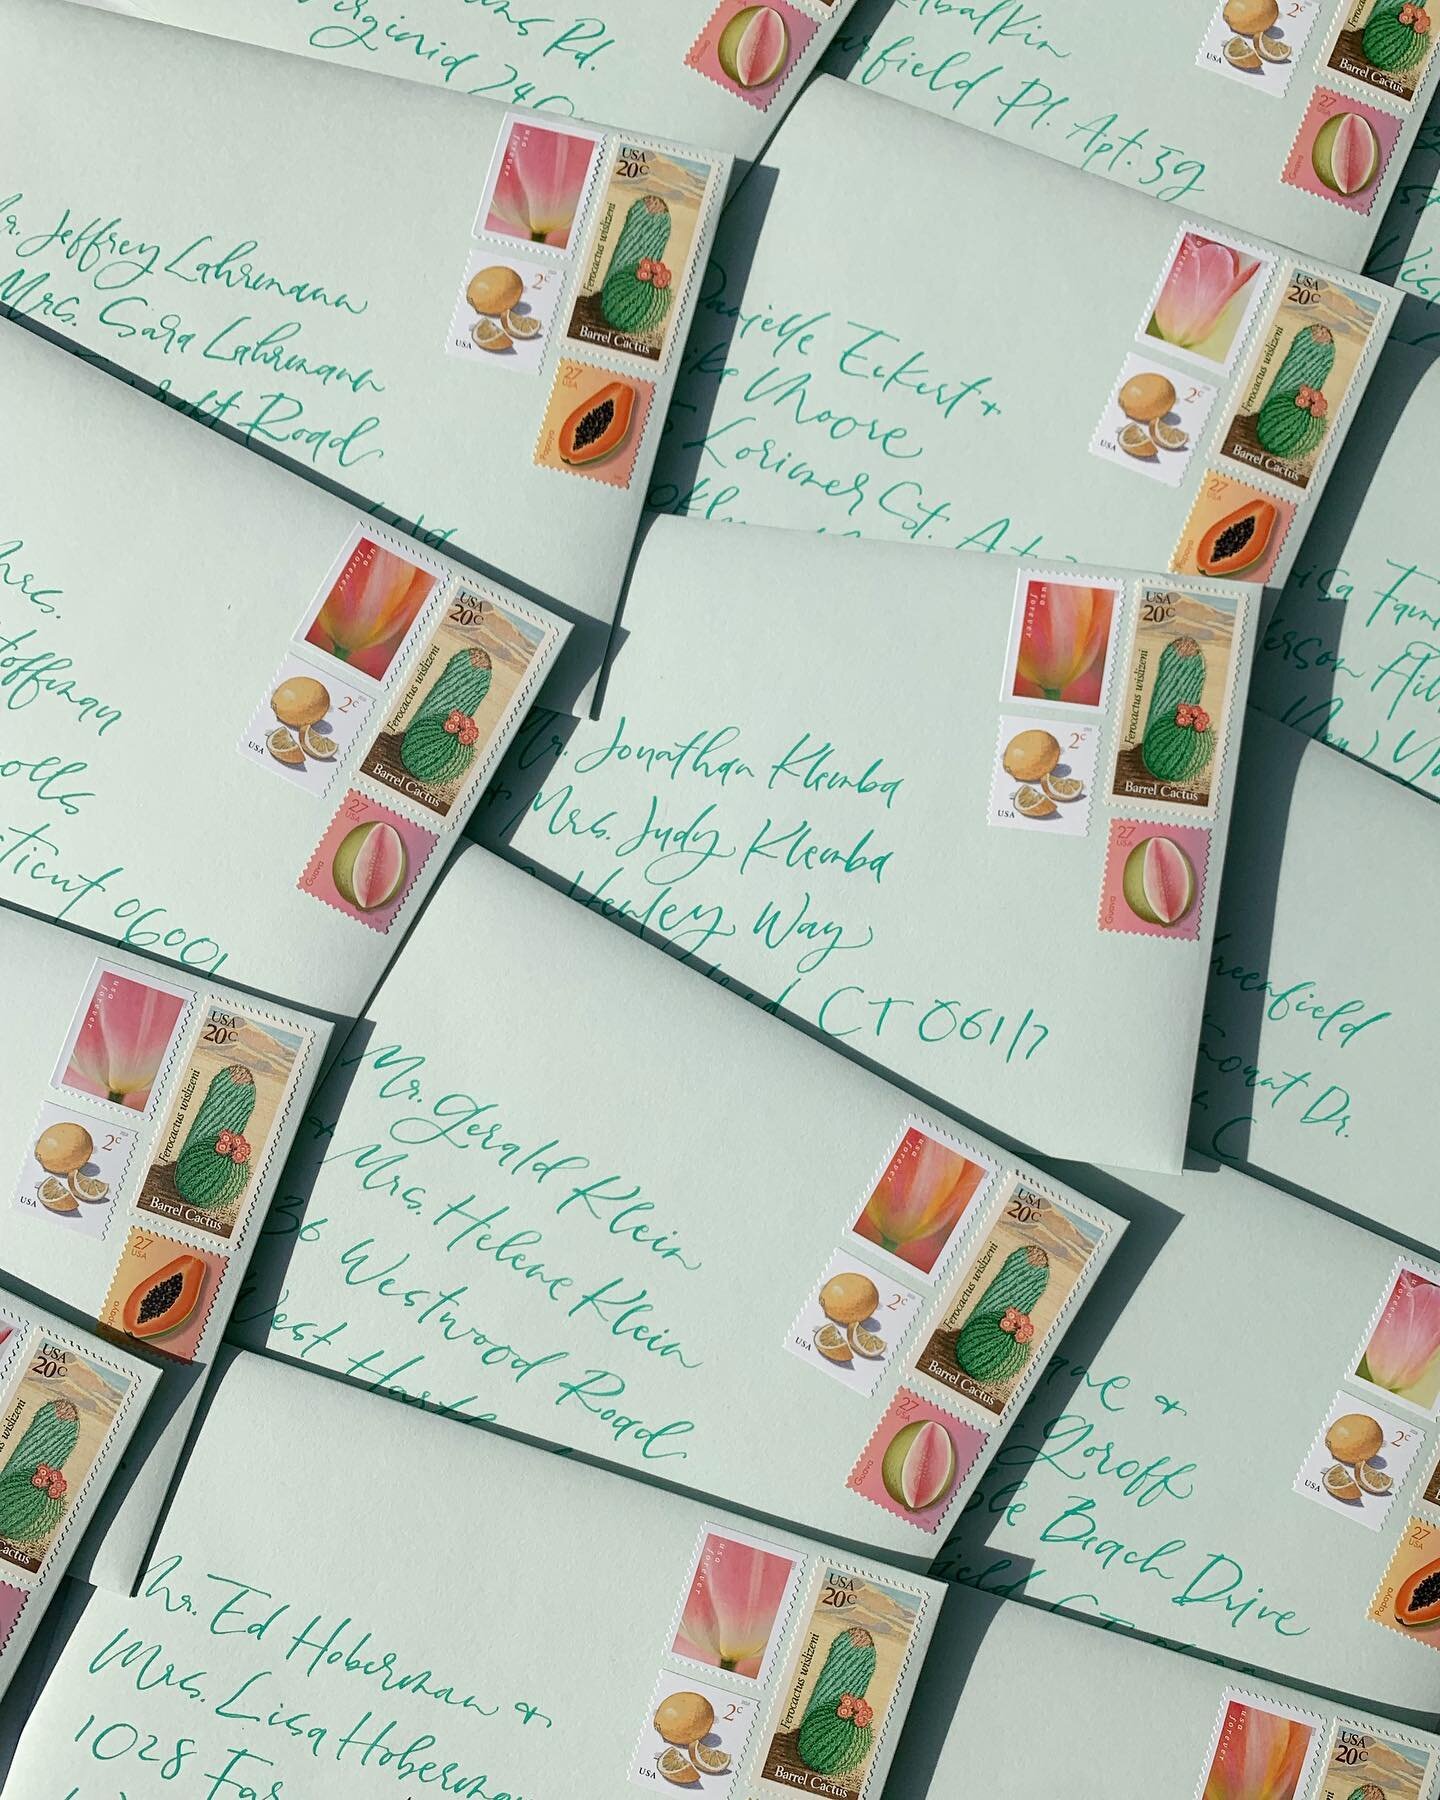 Can we take a moment for the stamps? 🌷🌵🍋 🍉
&bull;
A combination of current and vintage postage for Emily &amp; Austin&rsquo;s wedding in Palm Springs.
&bull;
&bull;
&bull;
&bull;
&bull;
#weddinginvitations 
#weddinginvitation 
#weddinginvites 
#w